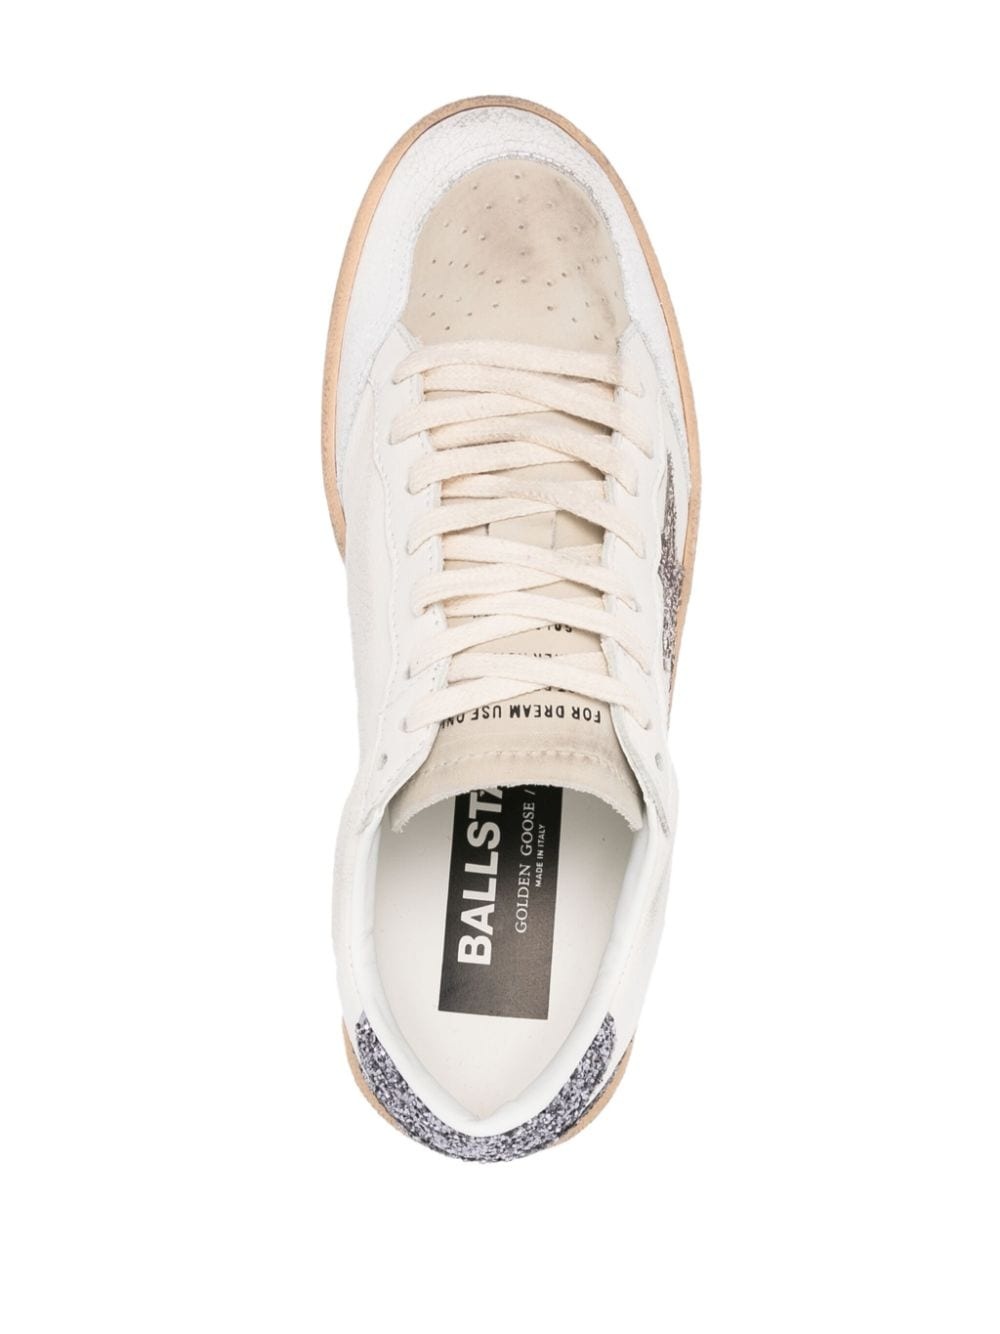 Ball Star glittered leather sneakers - 4